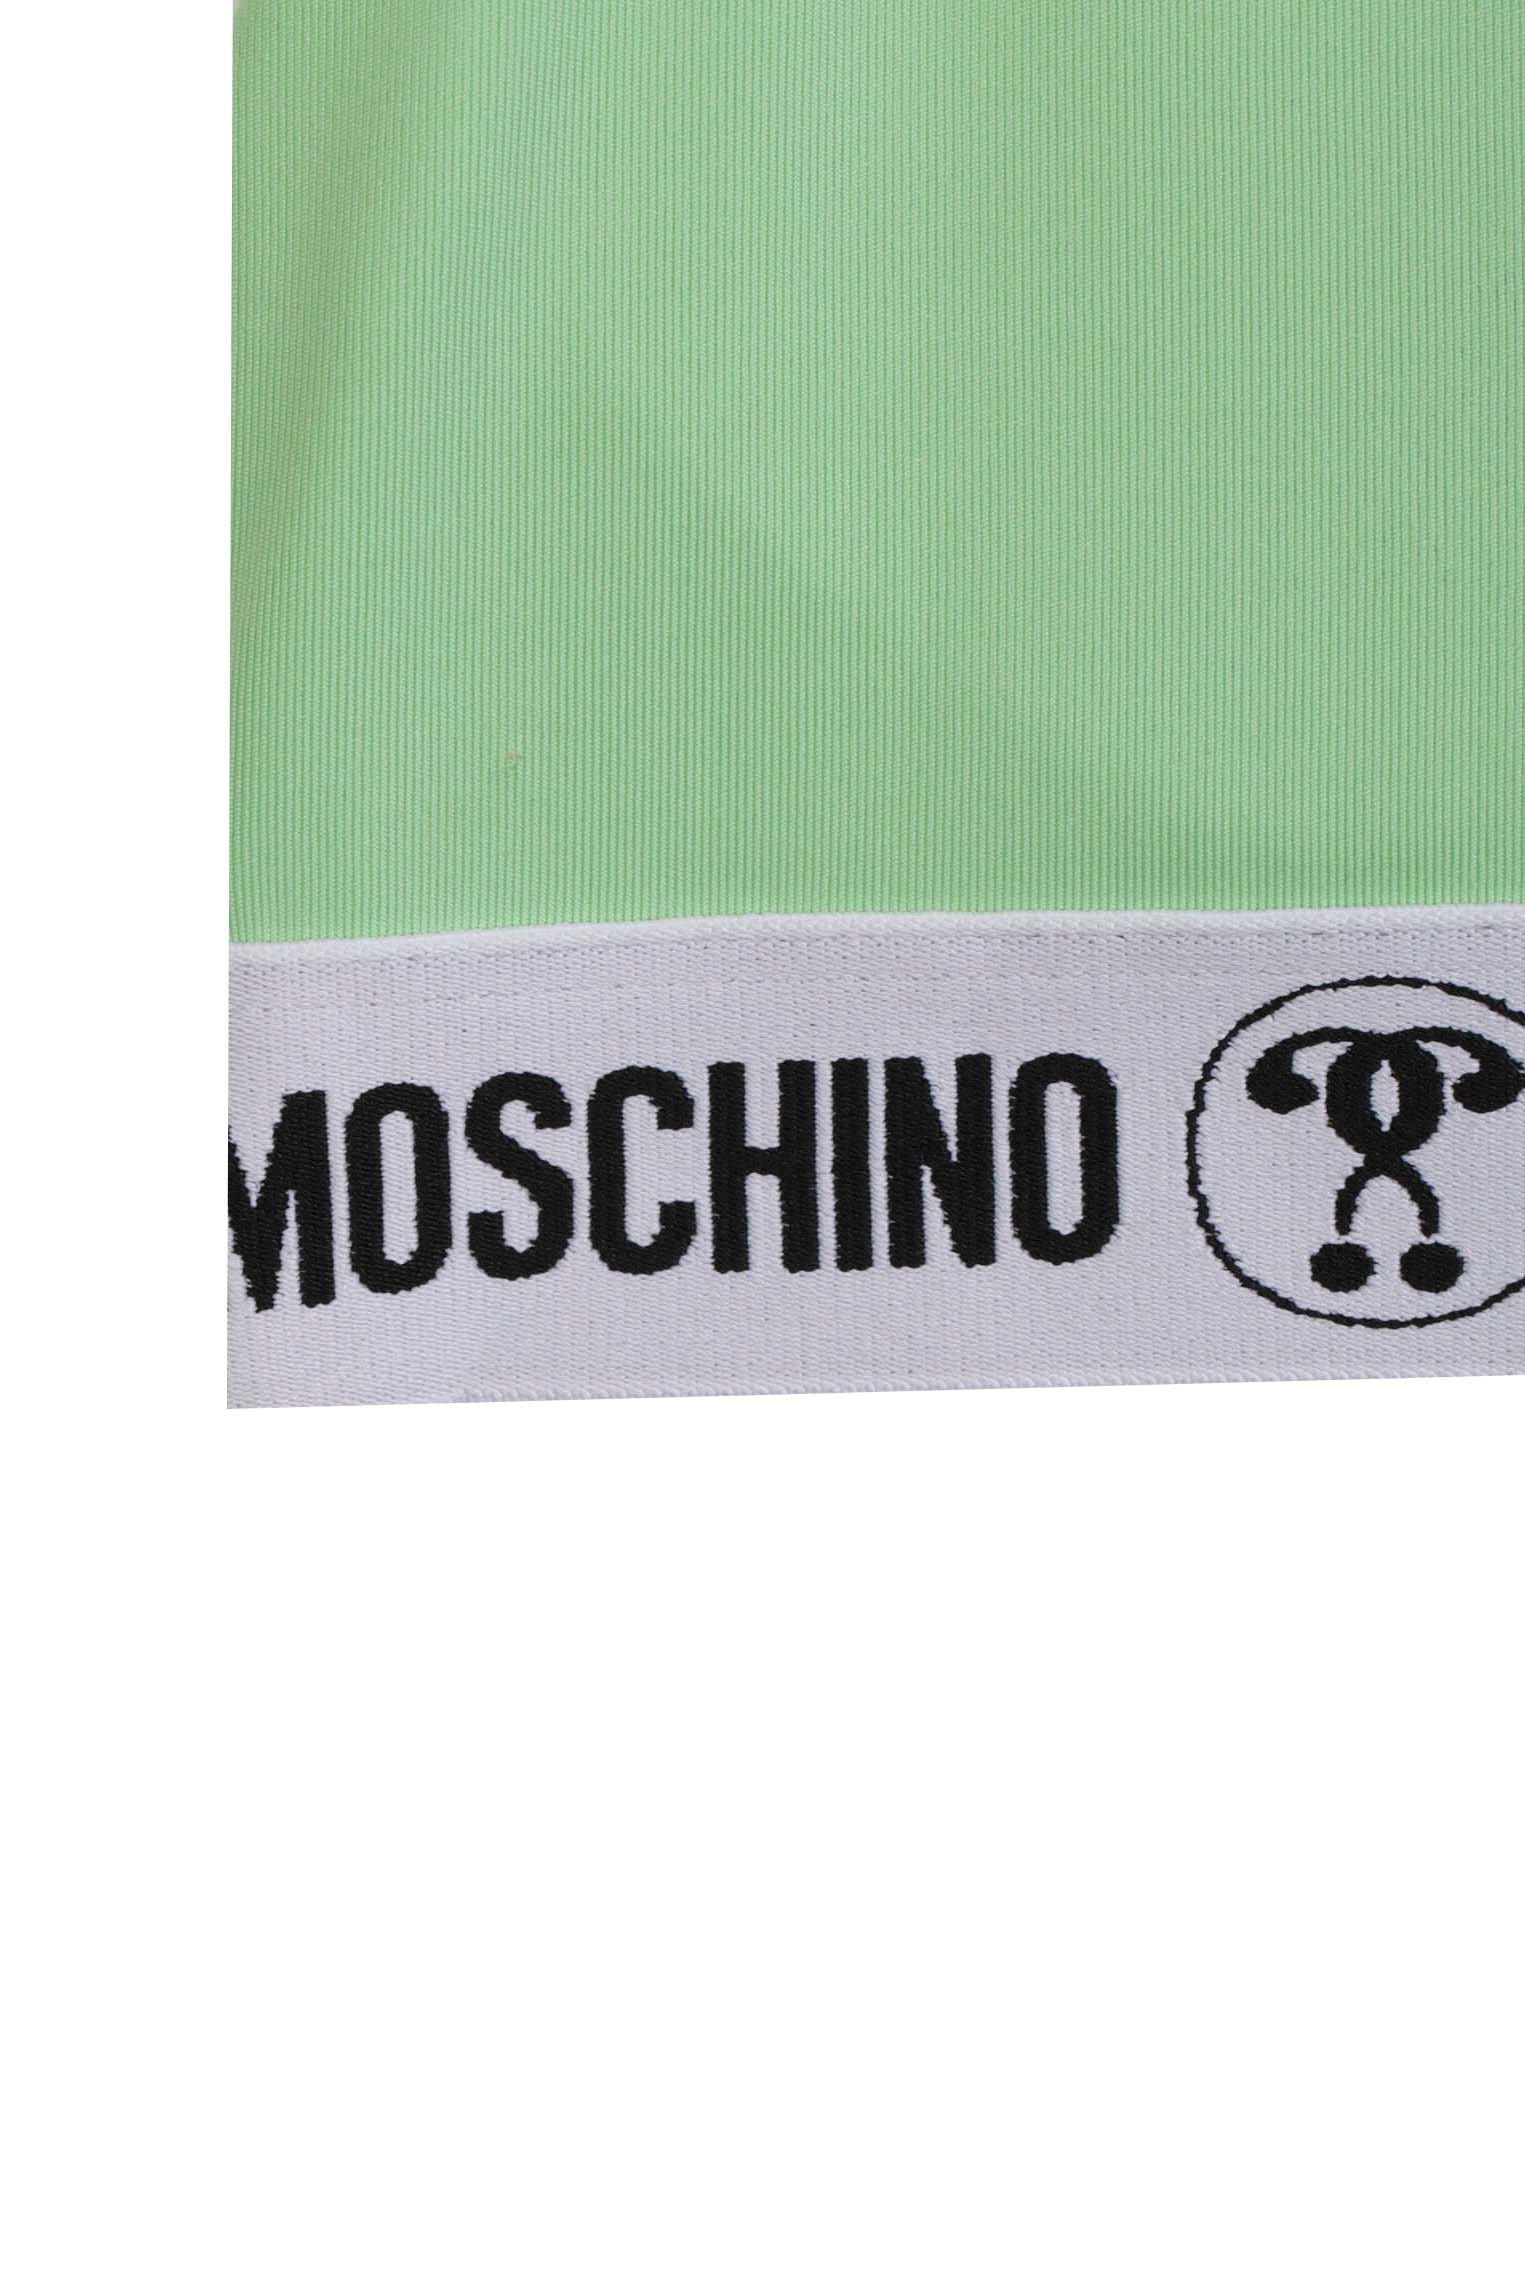 MOSCHINO TOP A0803 4602 449 DONNA